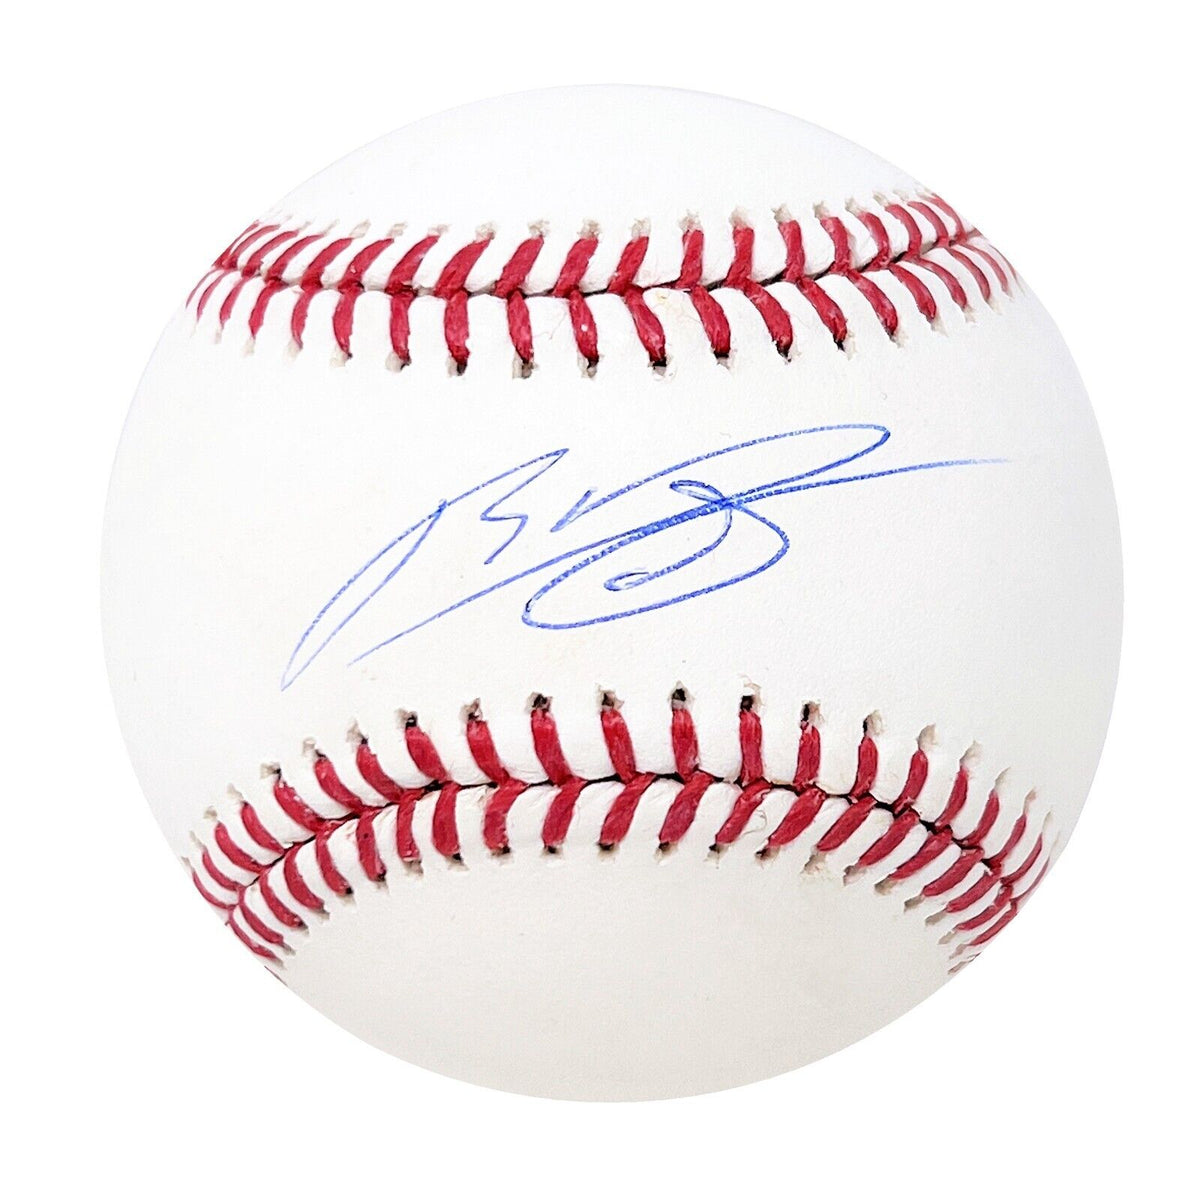 Official MLB Auctions: Authenticated Memorabilia